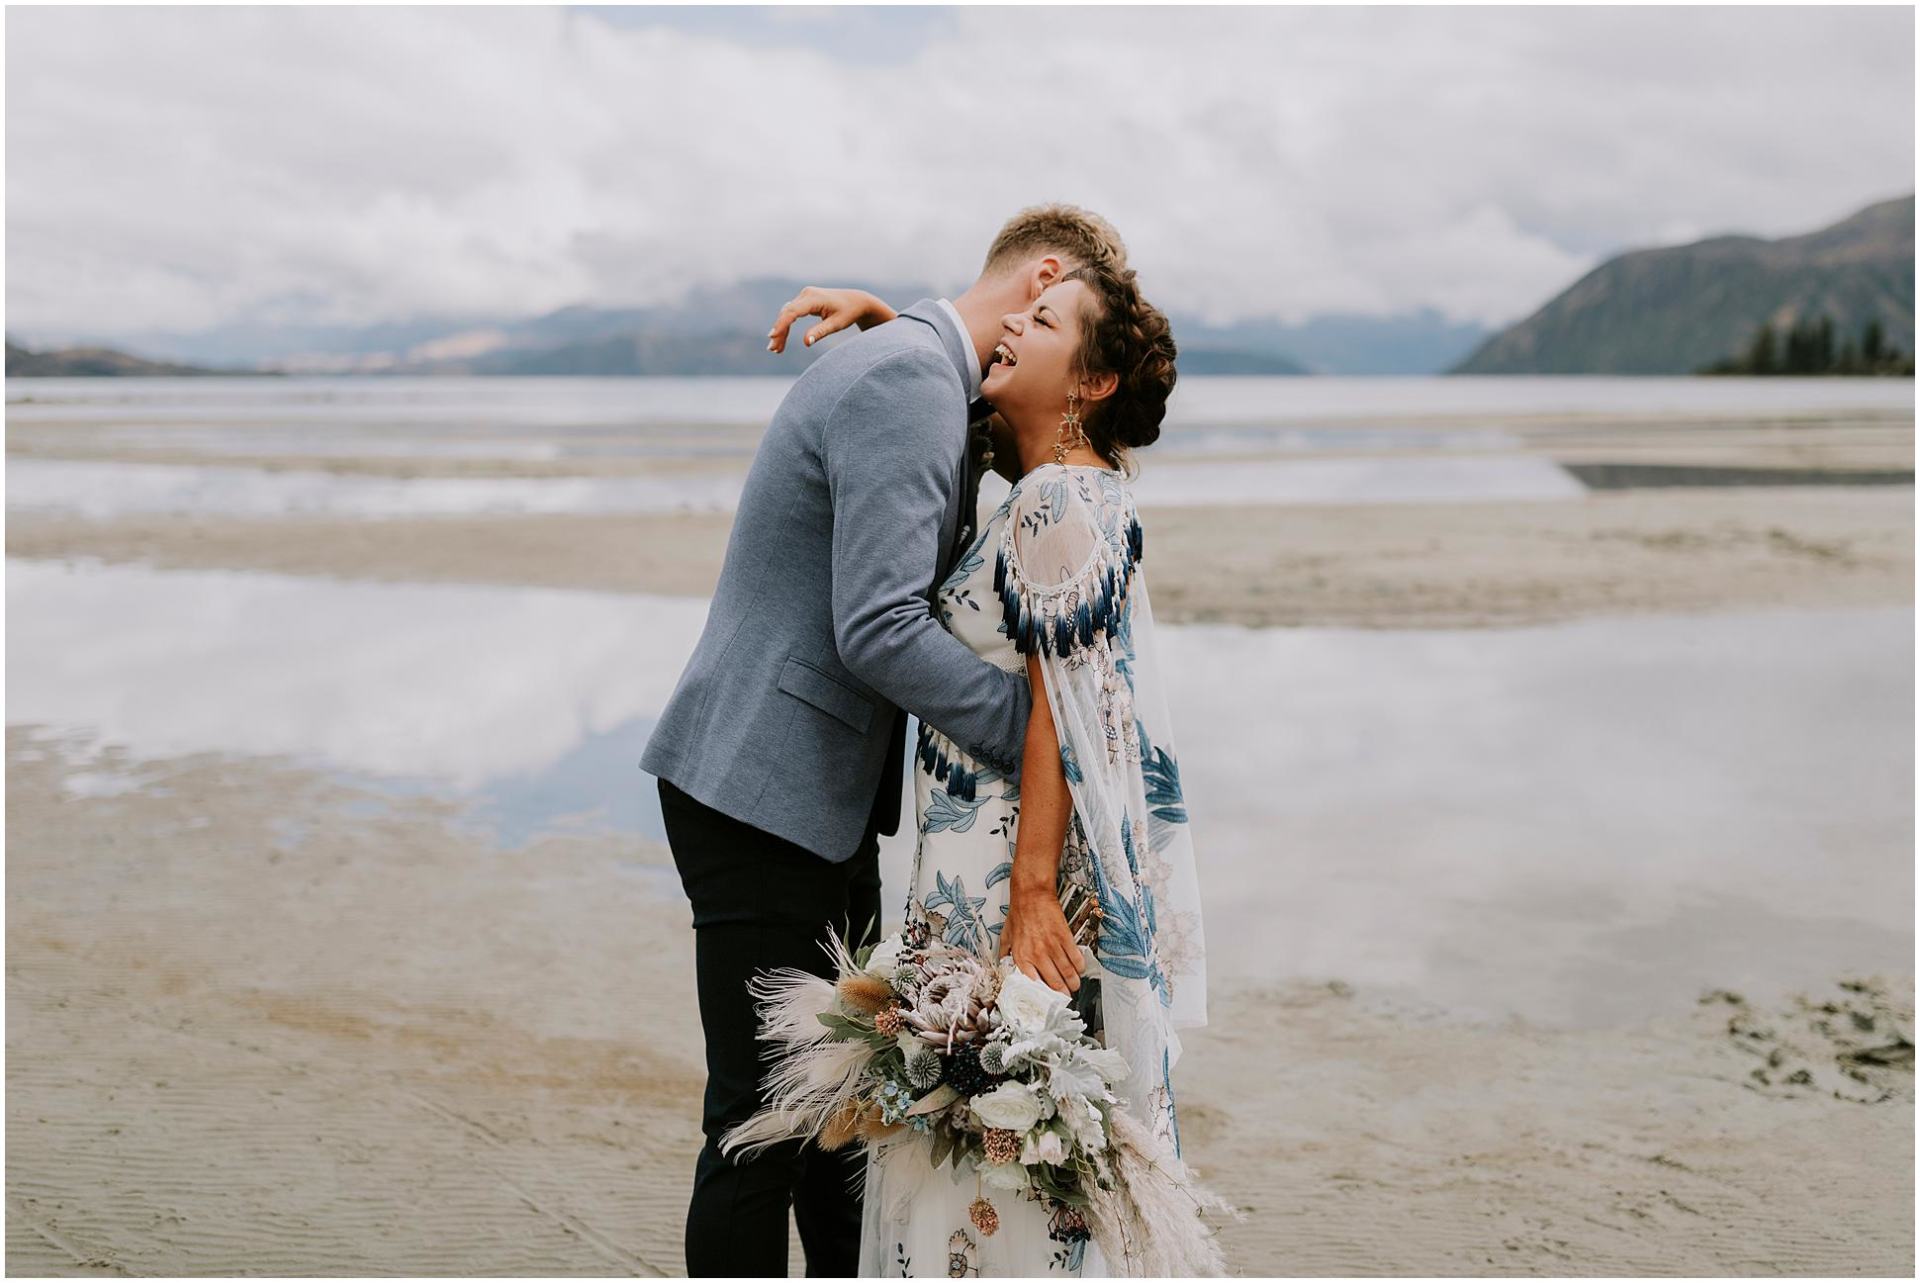 Charlotte Kiri Photography - Wedding Photography of a bride wearing a pretty blue floral dress with tassels, and her groom wearing a grey jacket and black pants as they embrace and laugh in front of lakes and mountains in Wanaka, New Zealand.